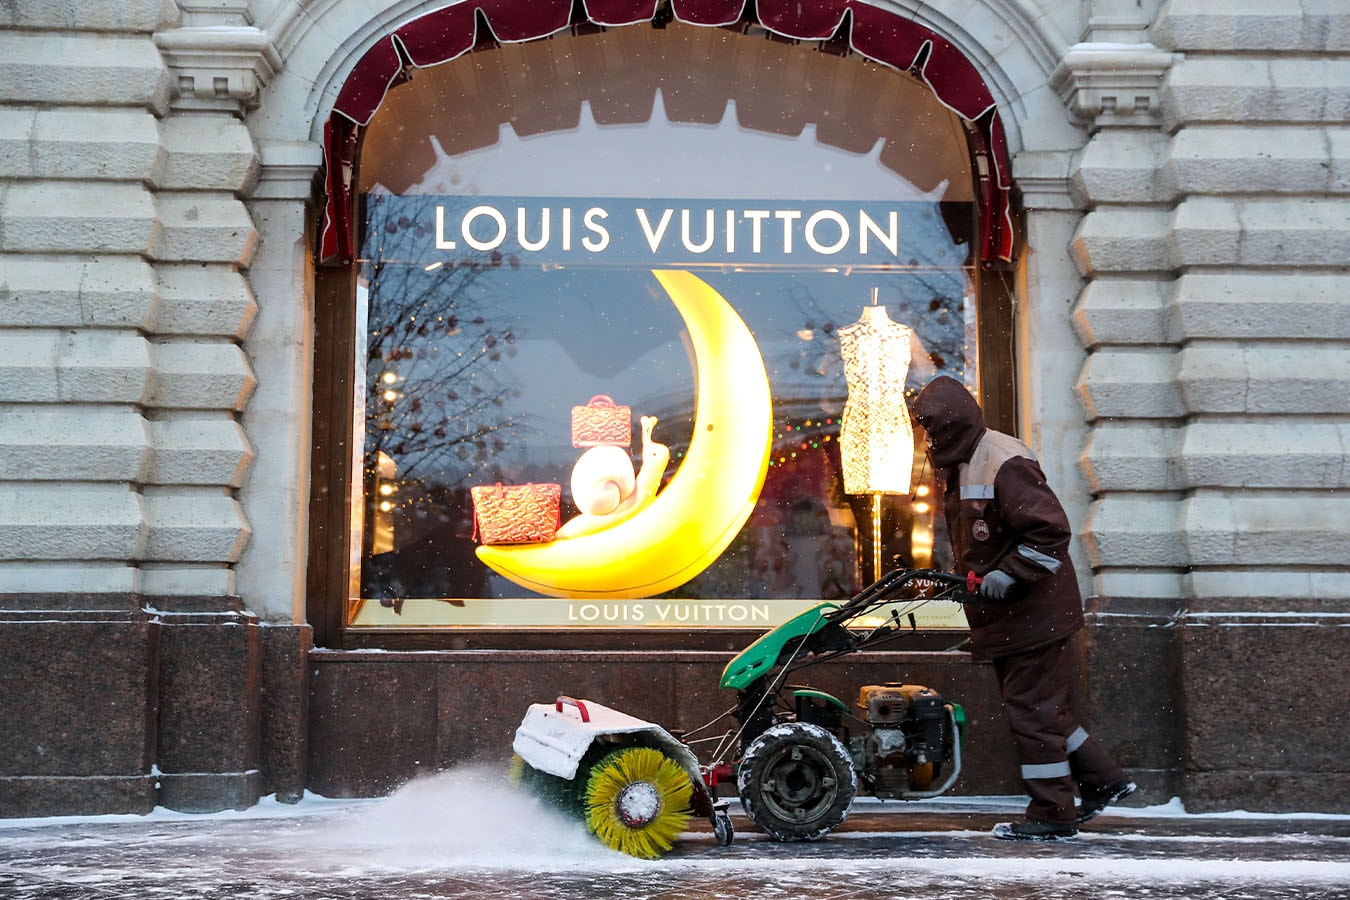 What's Going on with LVMH Stock and Russia?